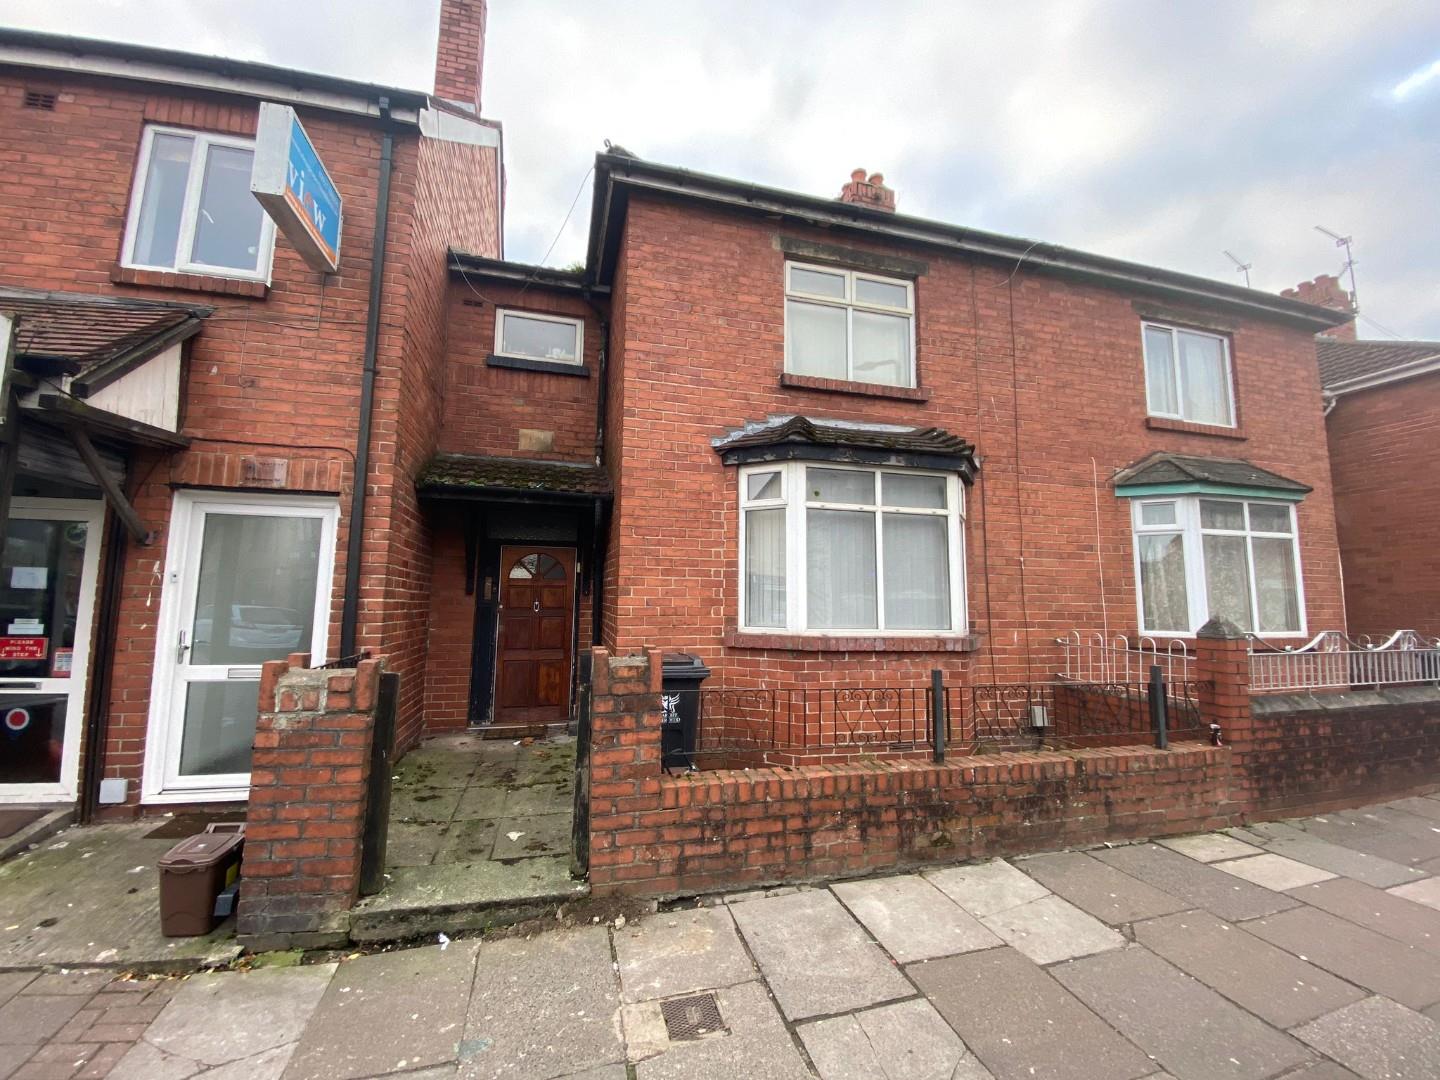 4 bed house to rent in Wyeverne Road, Cardiff, CF24